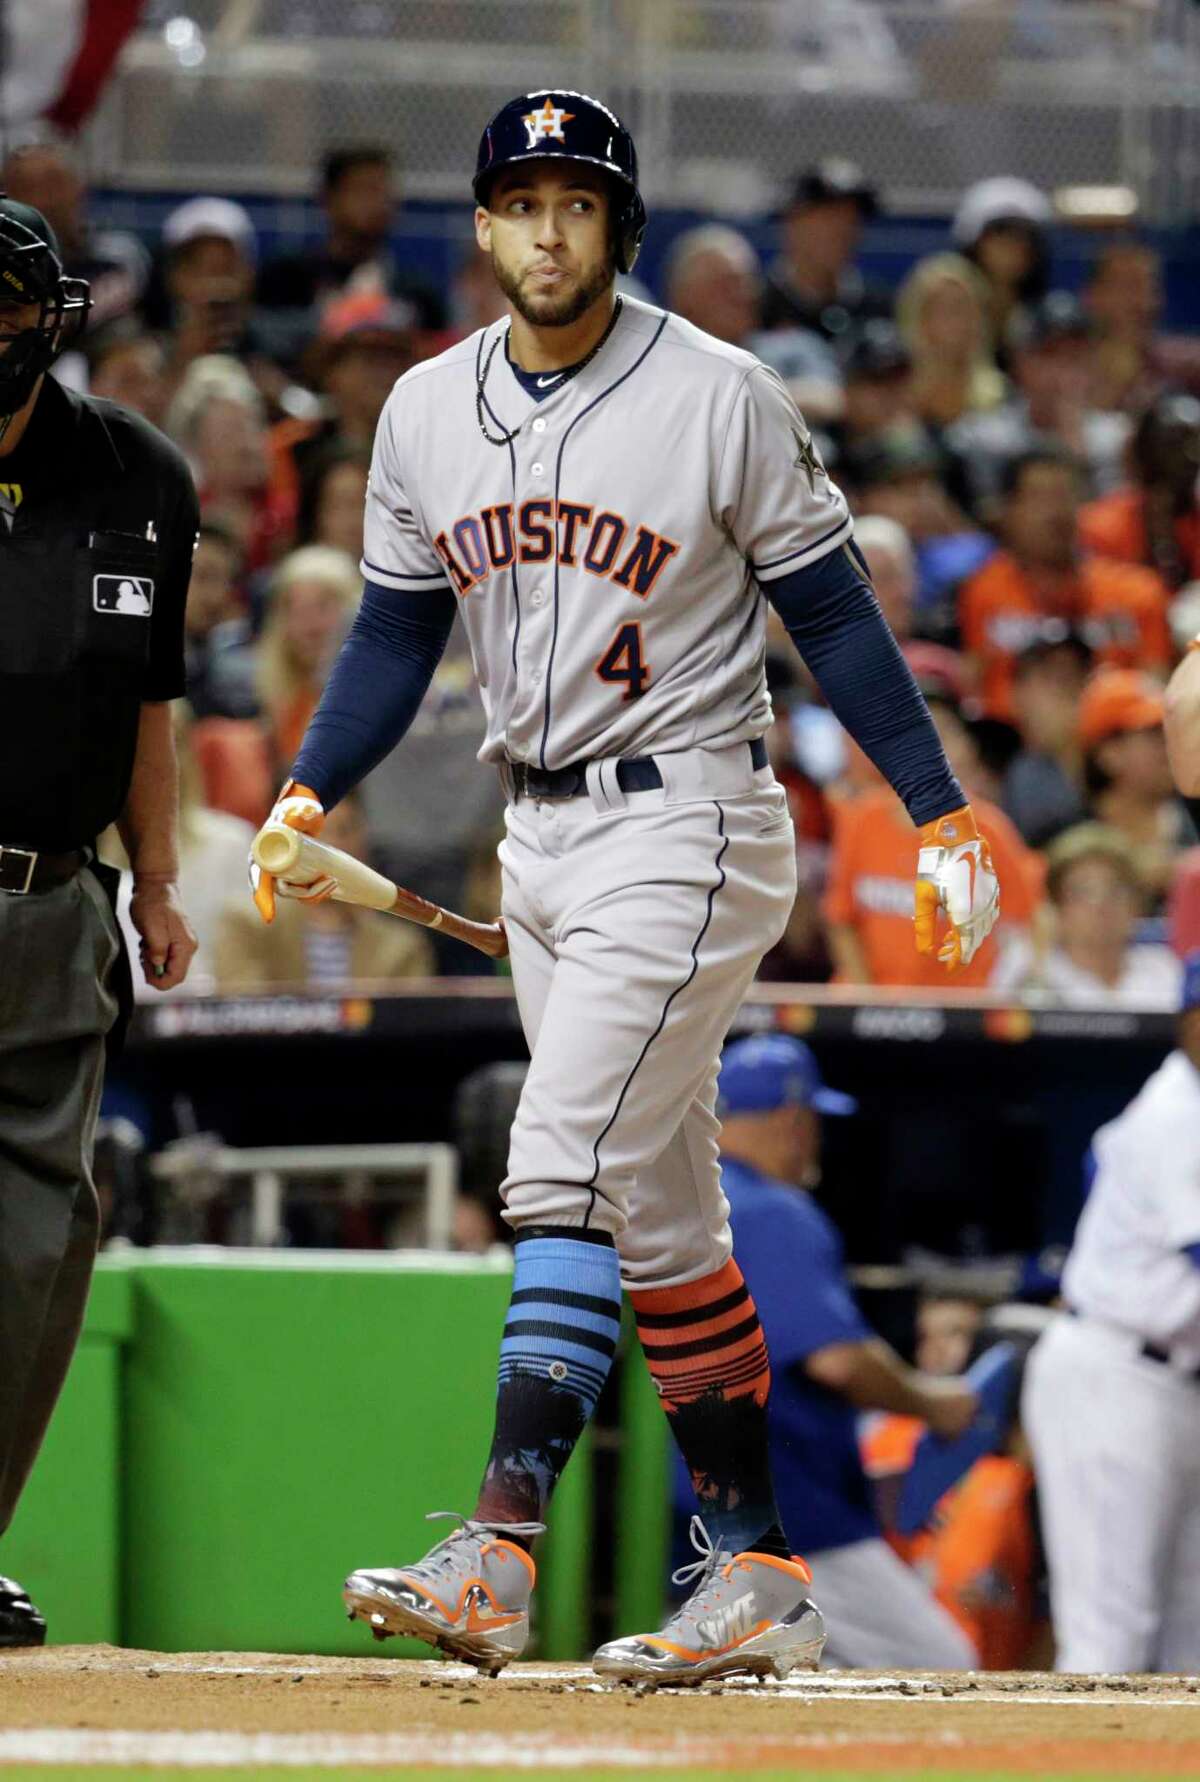 American League's Houston Astros George Springer (4) walks back to the dugout after striking out, during the first inning at the MLB baseball All-Star Game, Tuesday, July 11, 2017, in Miami. (AP Photo/Lynne Sladky)